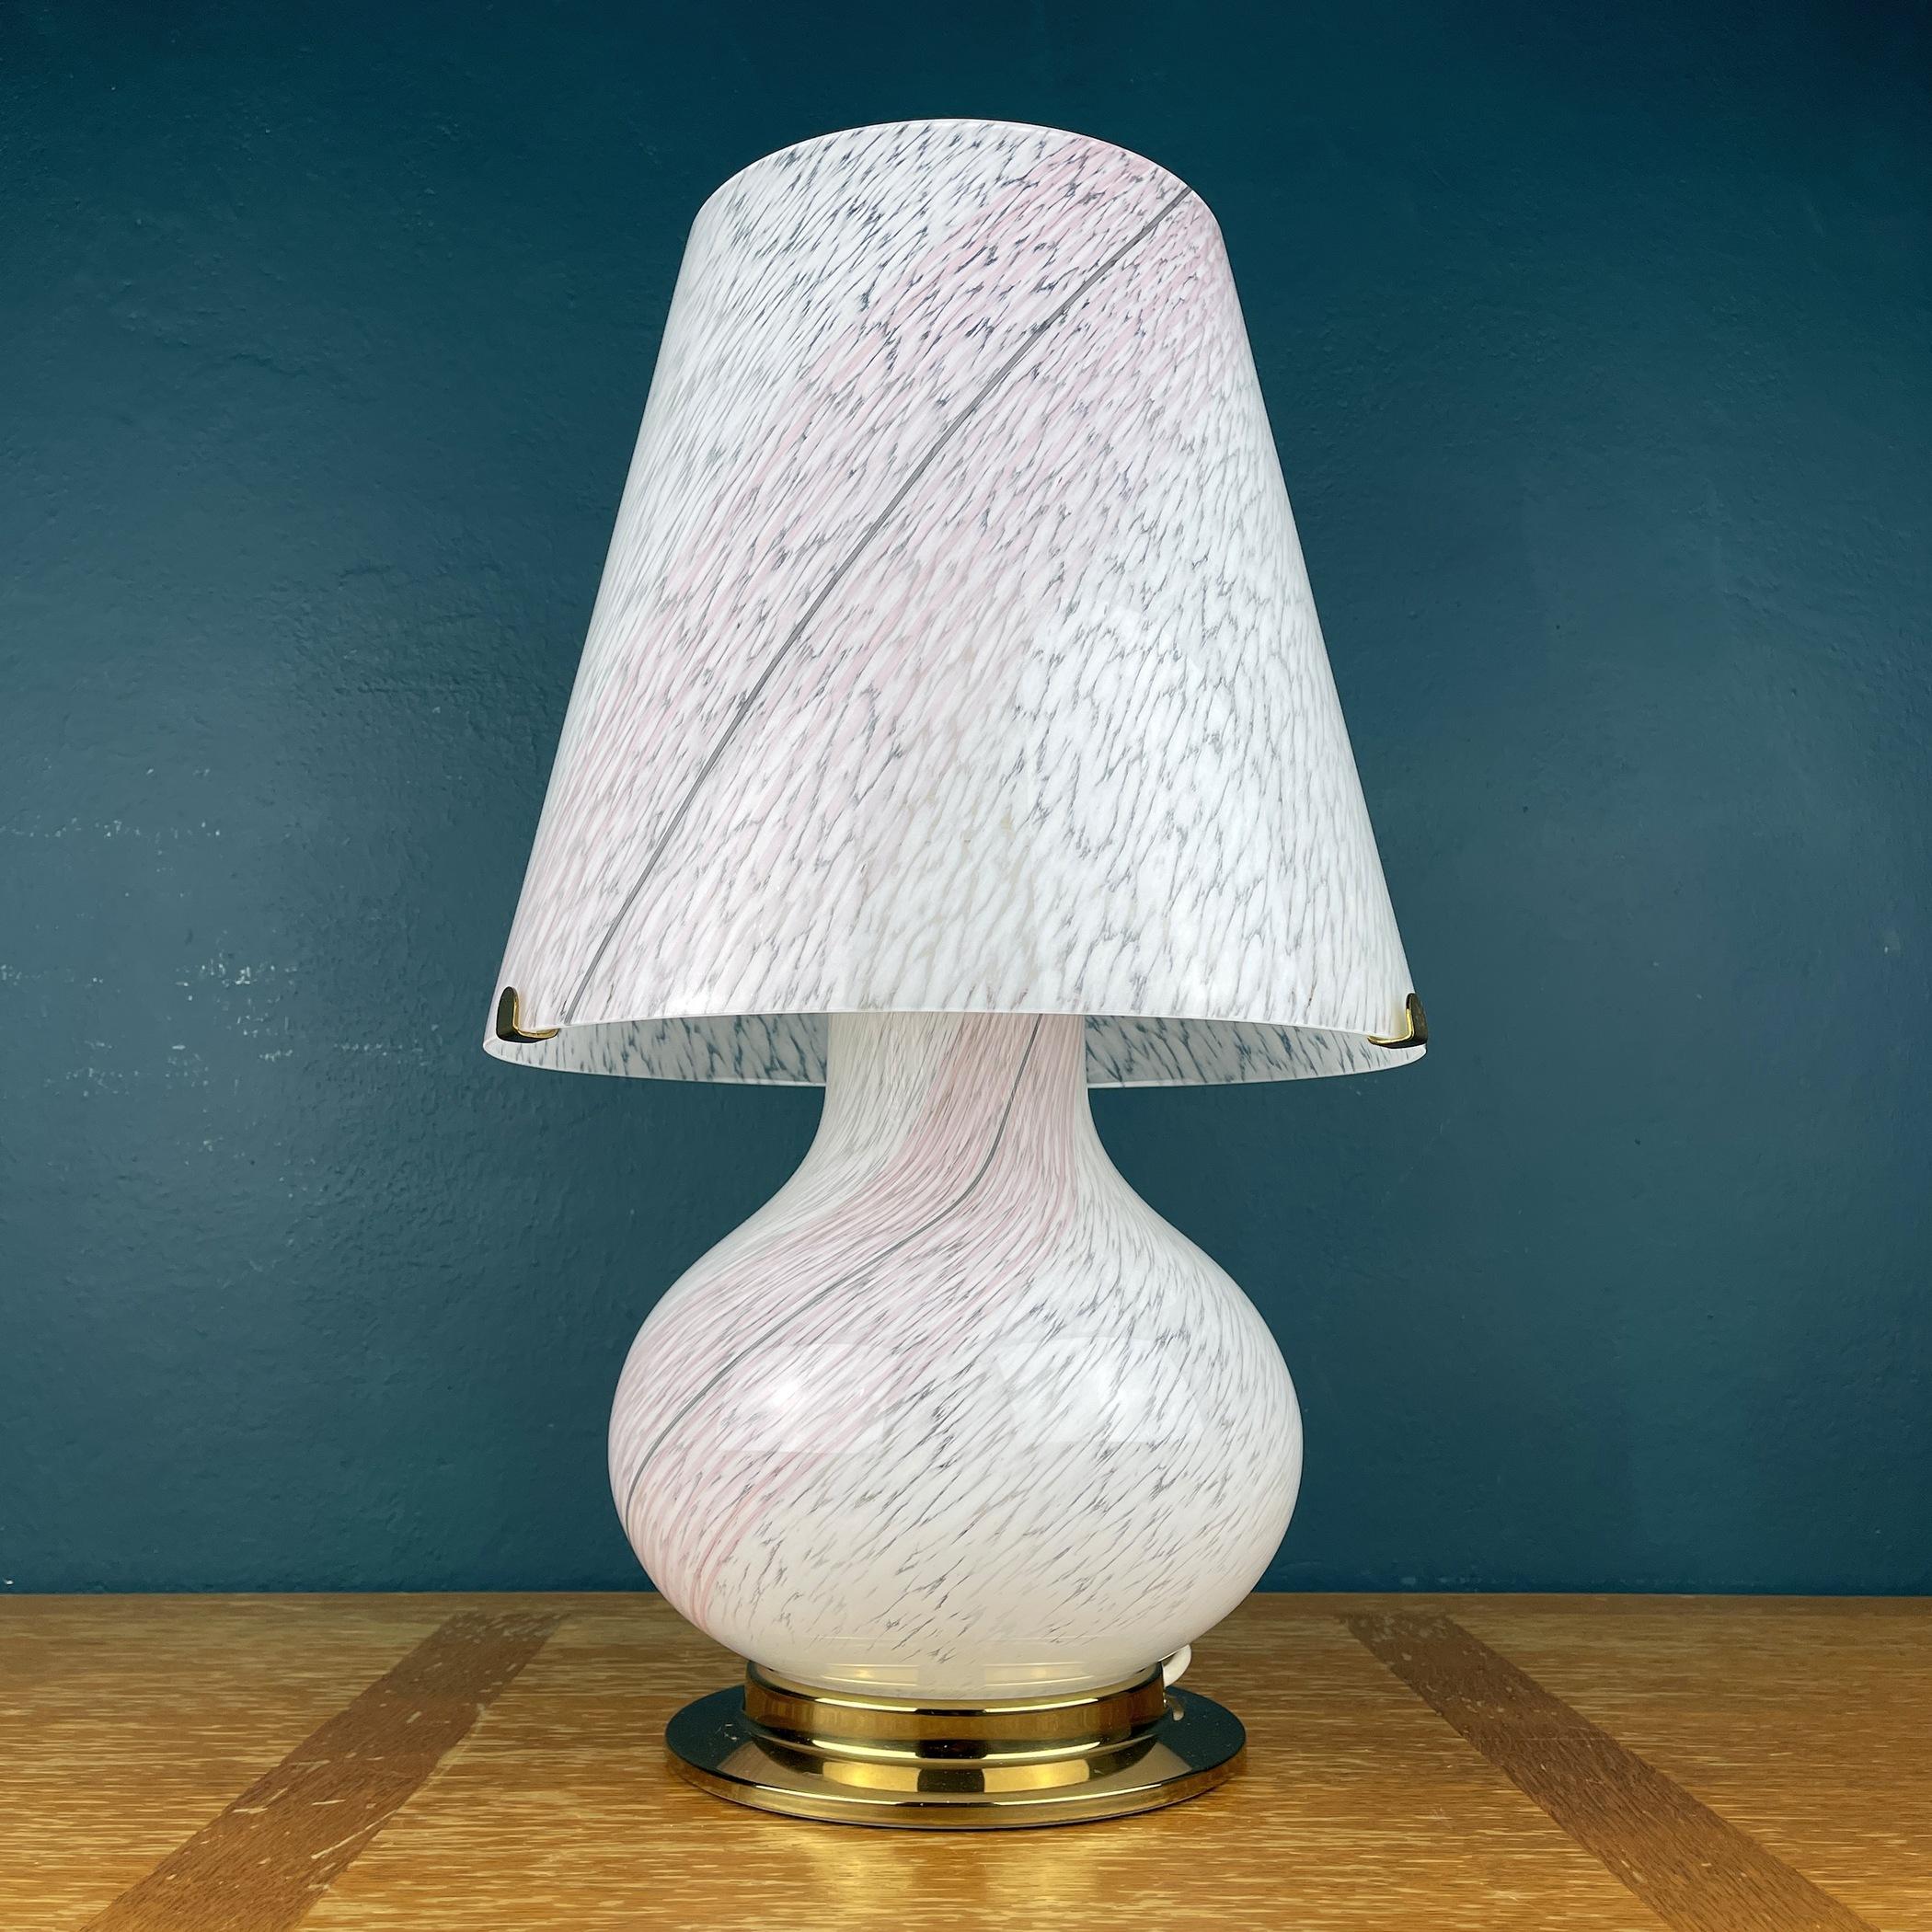 Large mushroom swirl Murano glass table lamp made in Italy in the 1970s. The beauty of the classic swirl glass makes this lamp a pleasure to look at. It has one light bulb above and three light bulbs in the base. Upper and lower bulbs can be